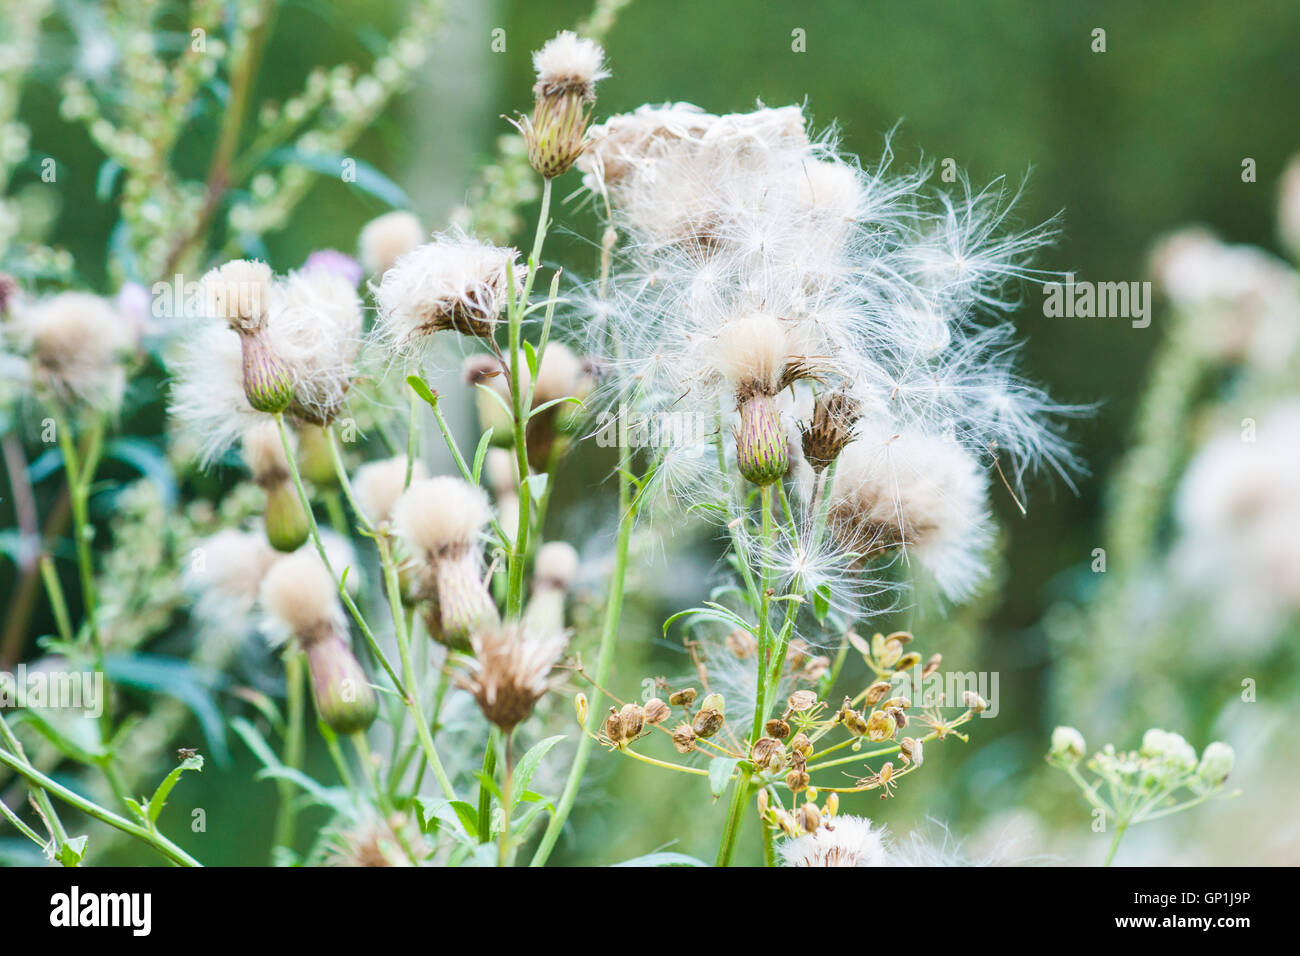 Thistle weeds. Closeup view of a forest weeds and vegetation. Time to throw seeds. Stock Photo